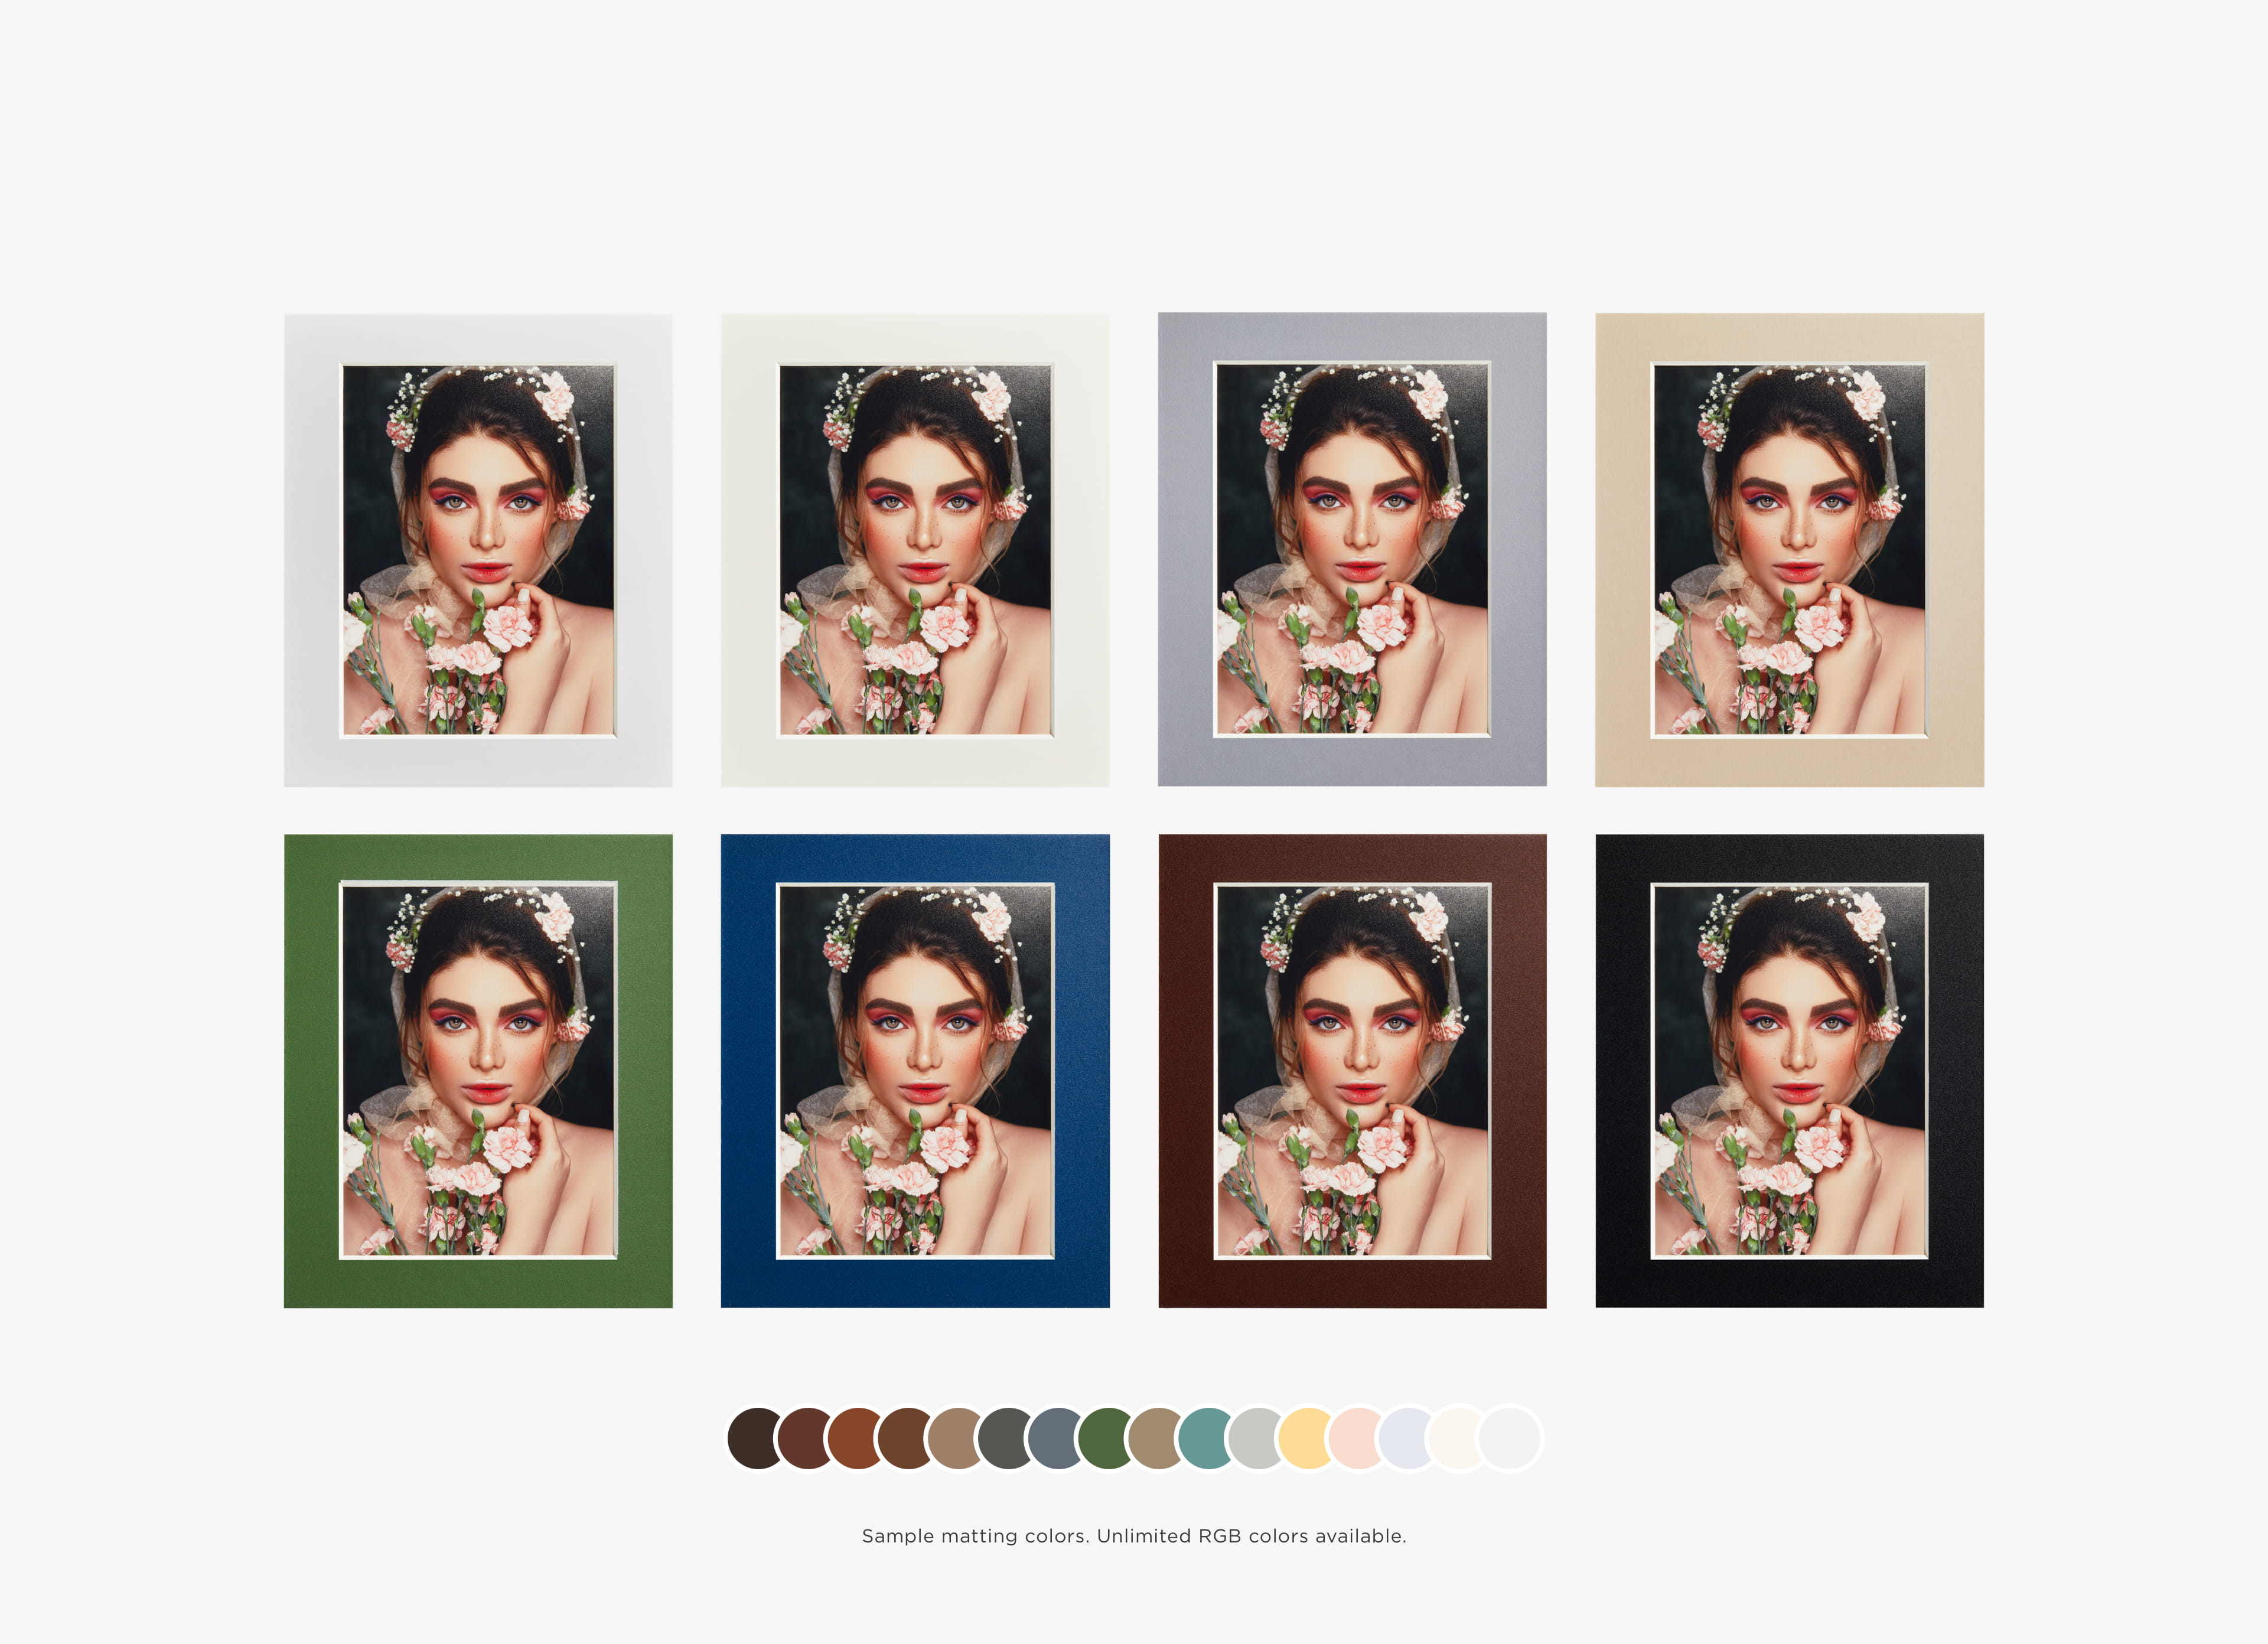 matted print showing a woman in eight different matting colors